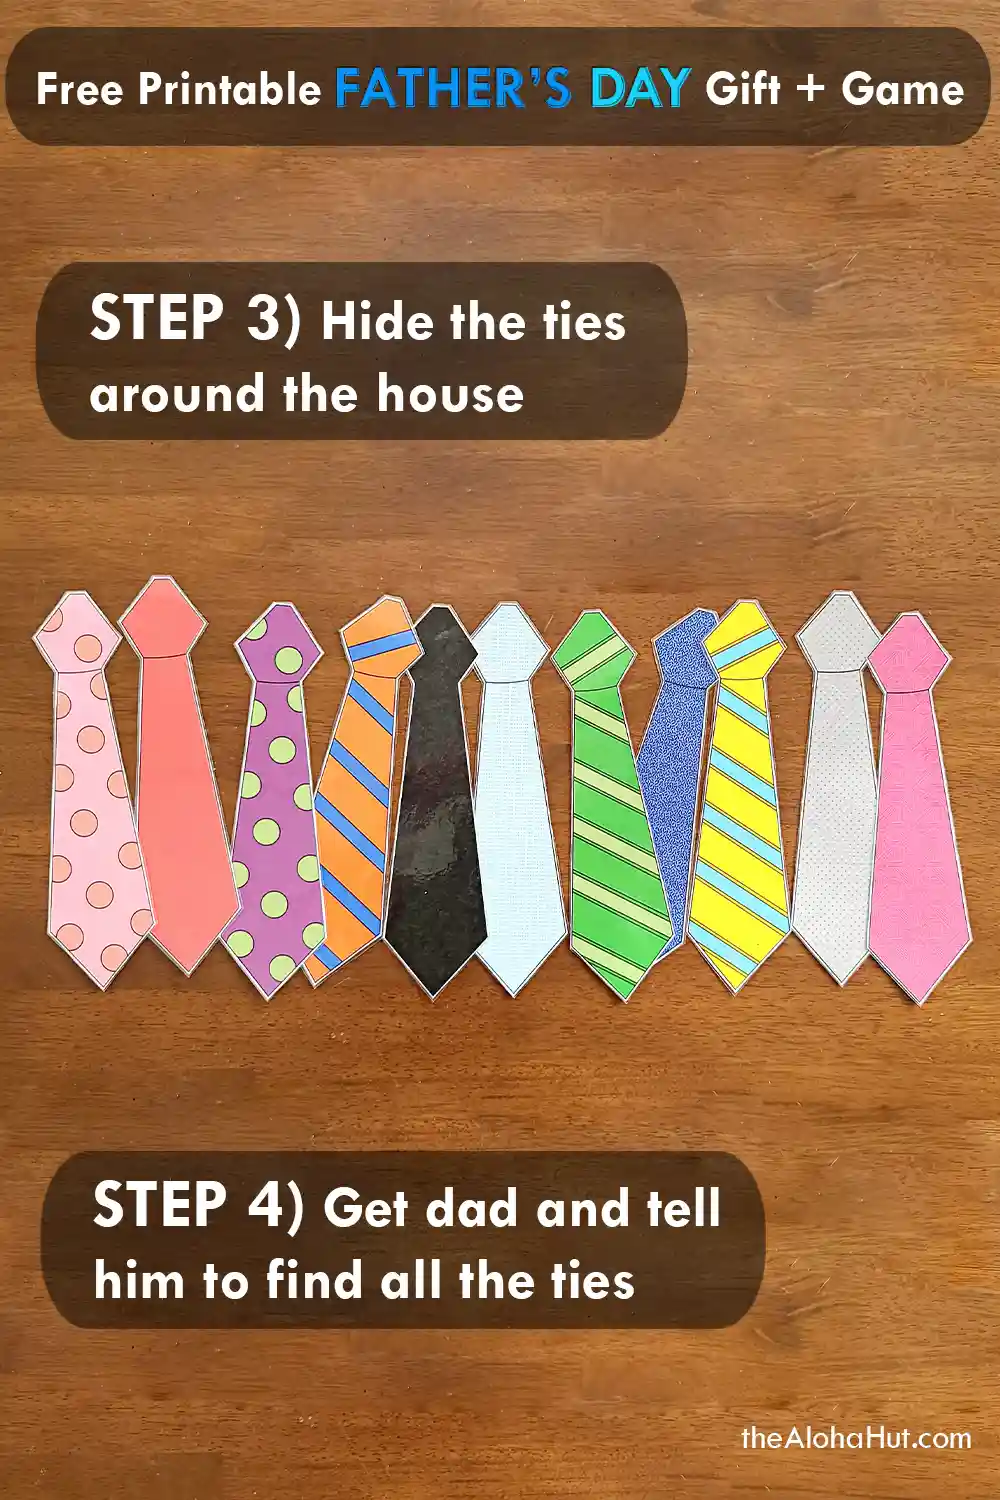 Pin the tie on dad Father's Day game and activity. Perfect activity for primary singing time at church or for the kids to play with dad. Print the Father's Day coloring pages and help kids draw a picture of dad or grandpa. Then print the ties and have the kids write messages on the ties. Makes a great Father's Day card and easy Father's Day gift from the kids. Also a great art activity for the kids to draw pictures of dad.